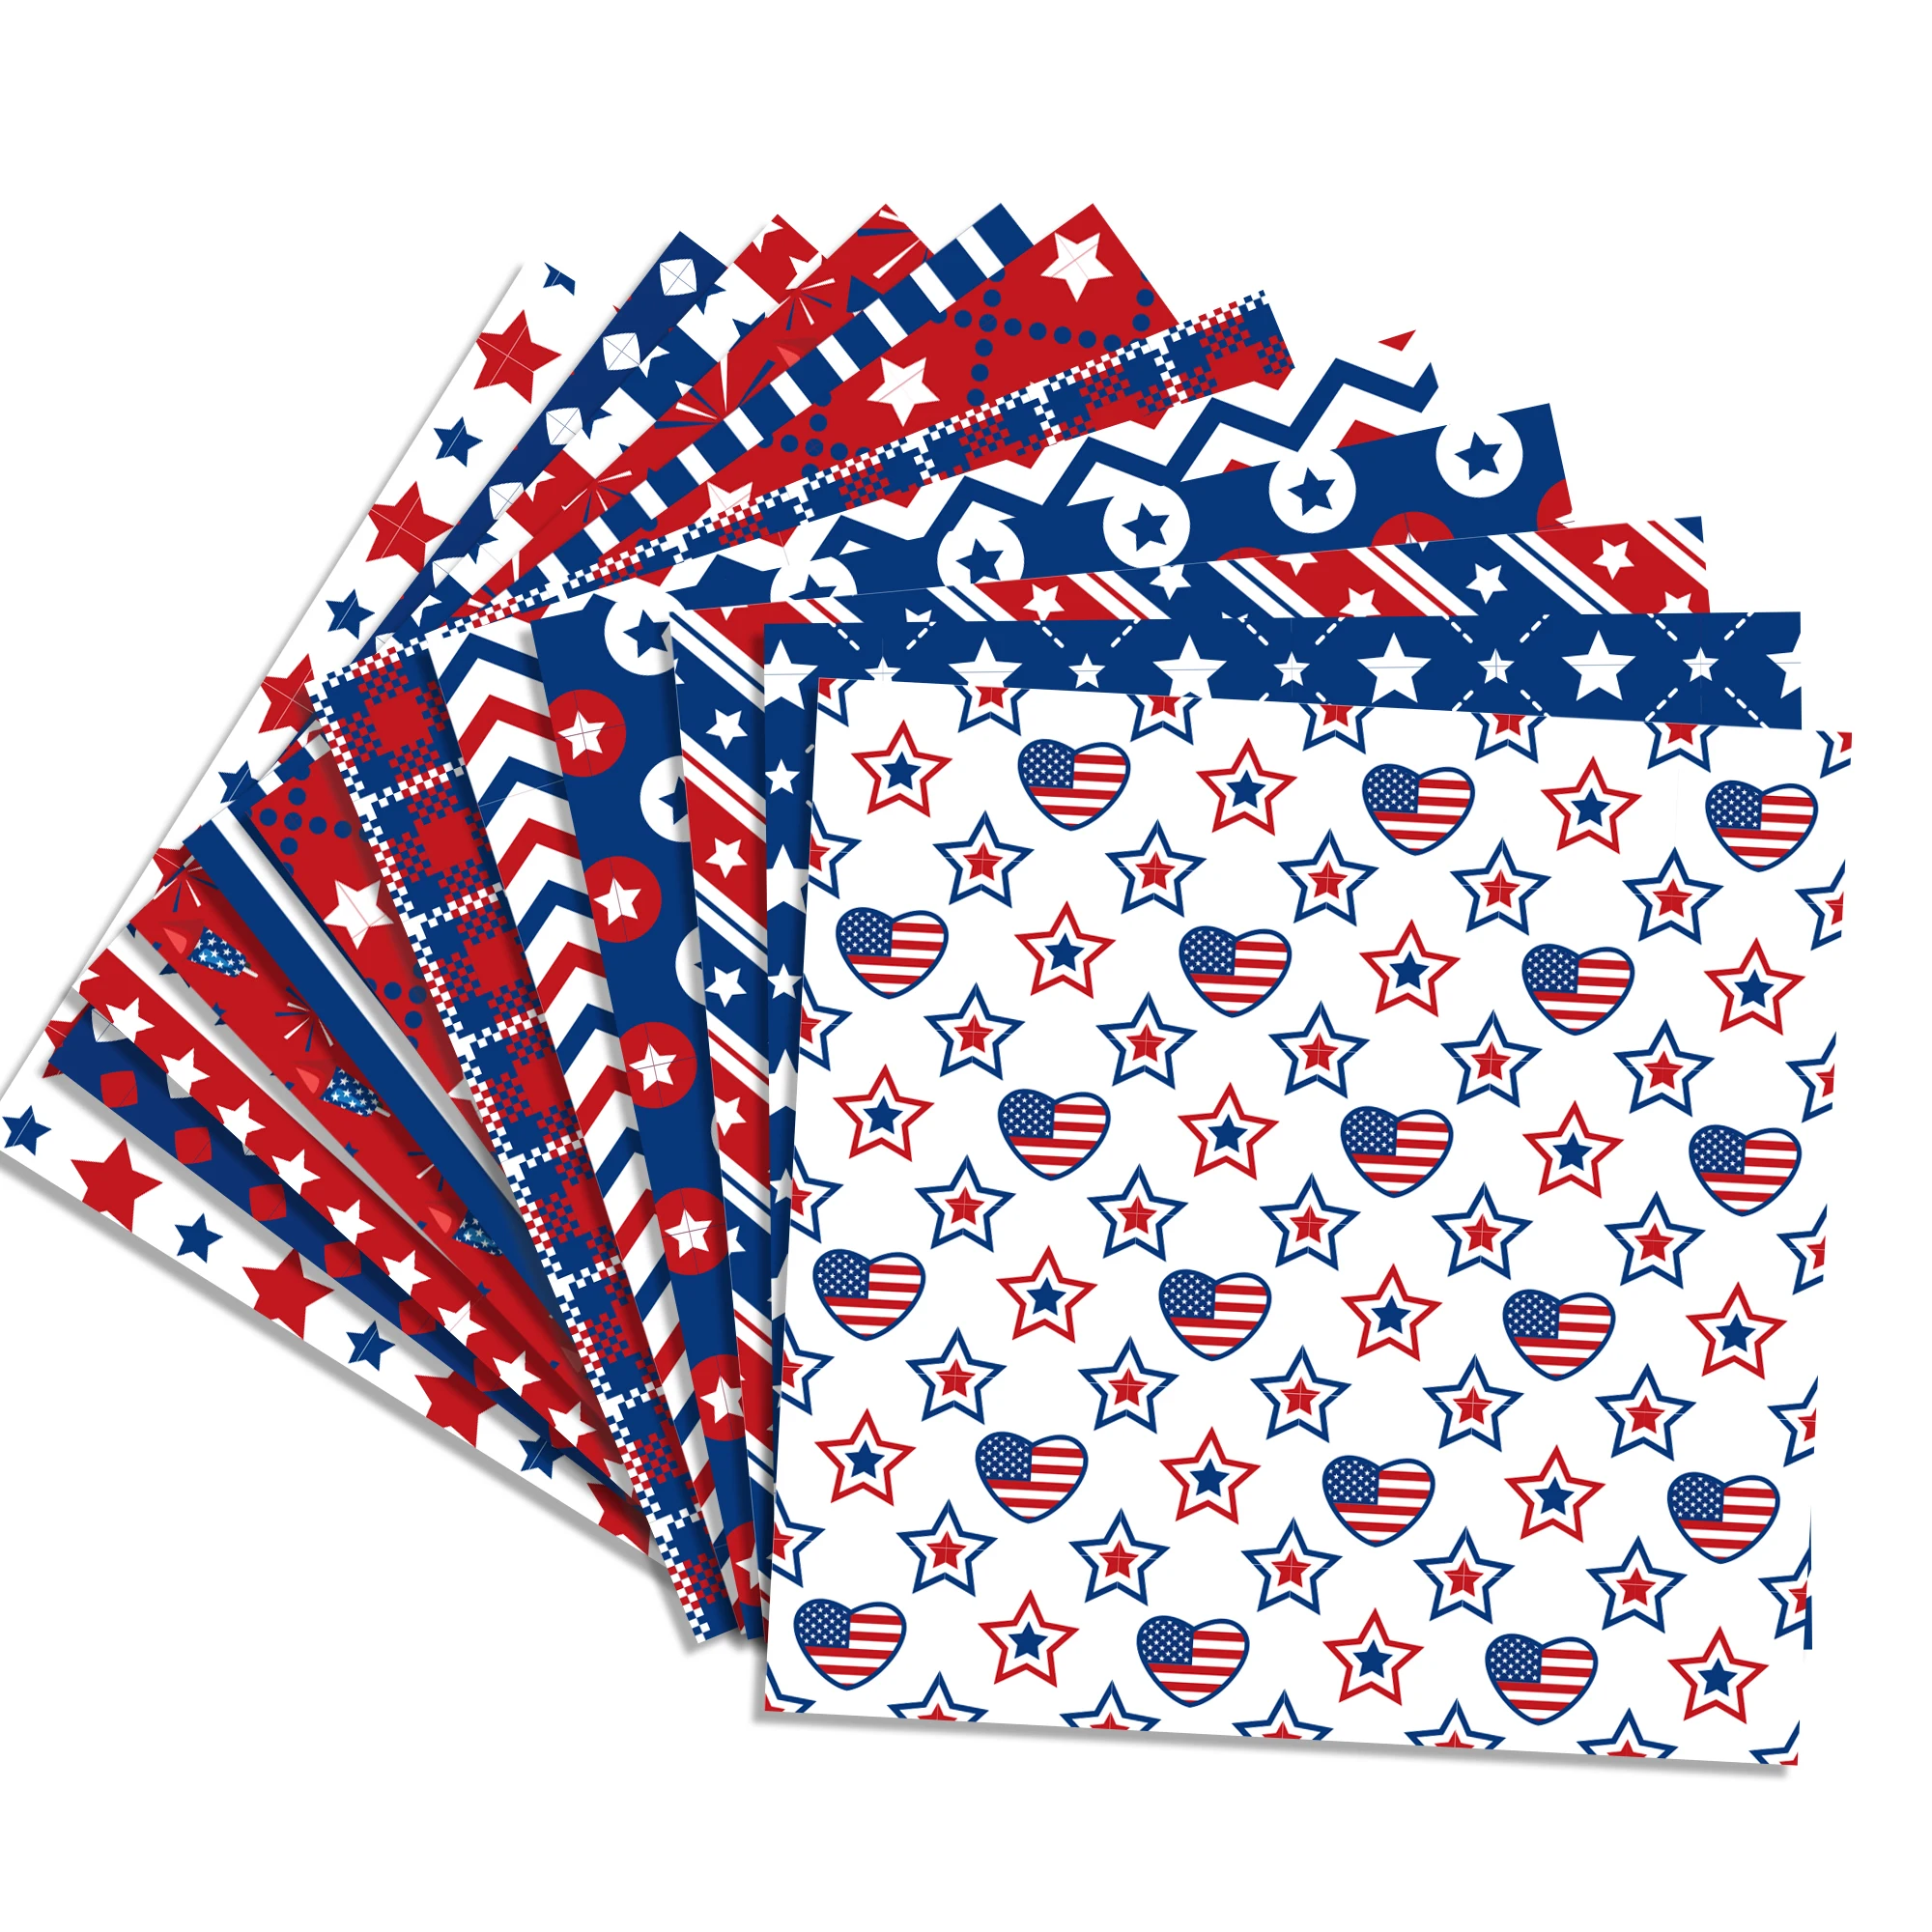 

24pcs/set Cool July 4th Day USA National Flag Independence Day Birthday Party DIY Square Gift Wrapping Handbook Material Paper